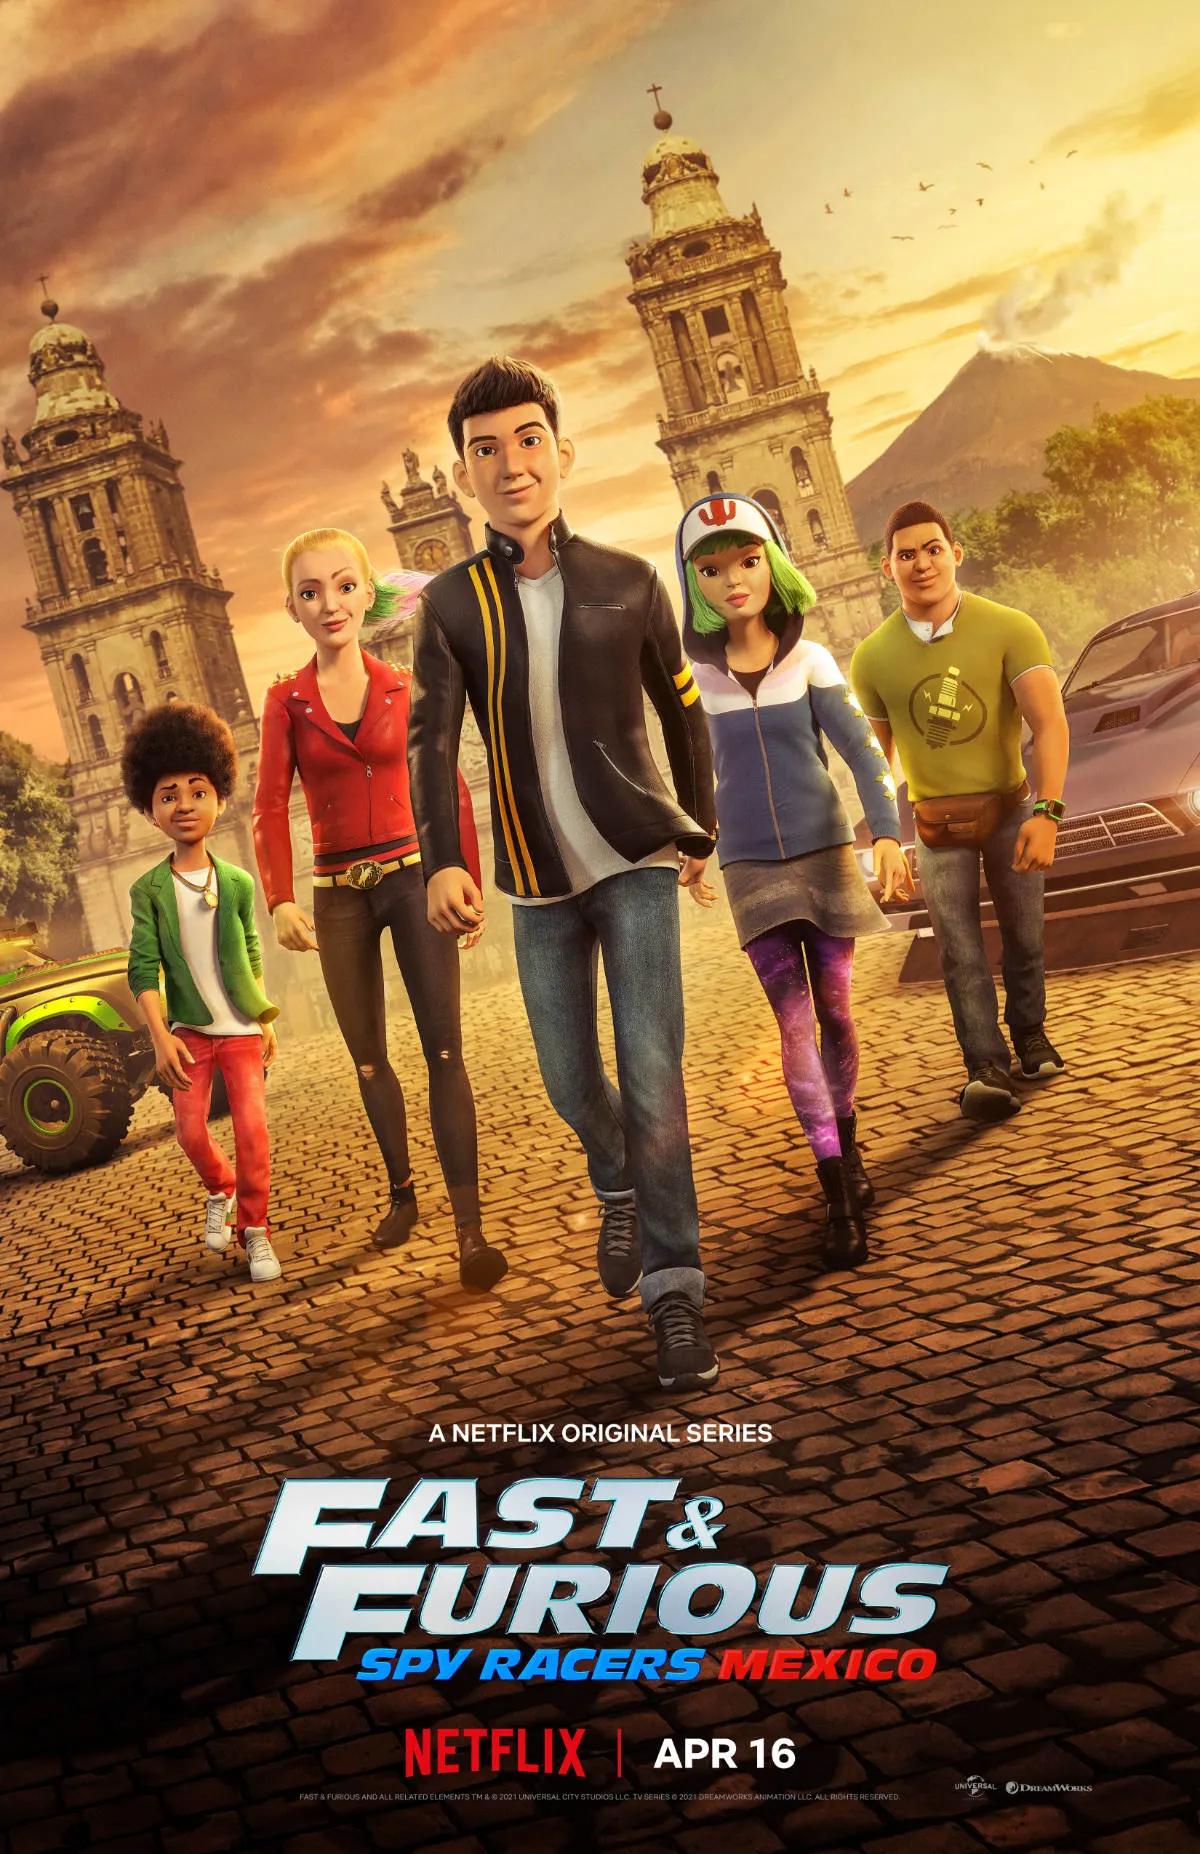 Season 4 (Fast & Furious: Spy Racers). The Fast and the Furious